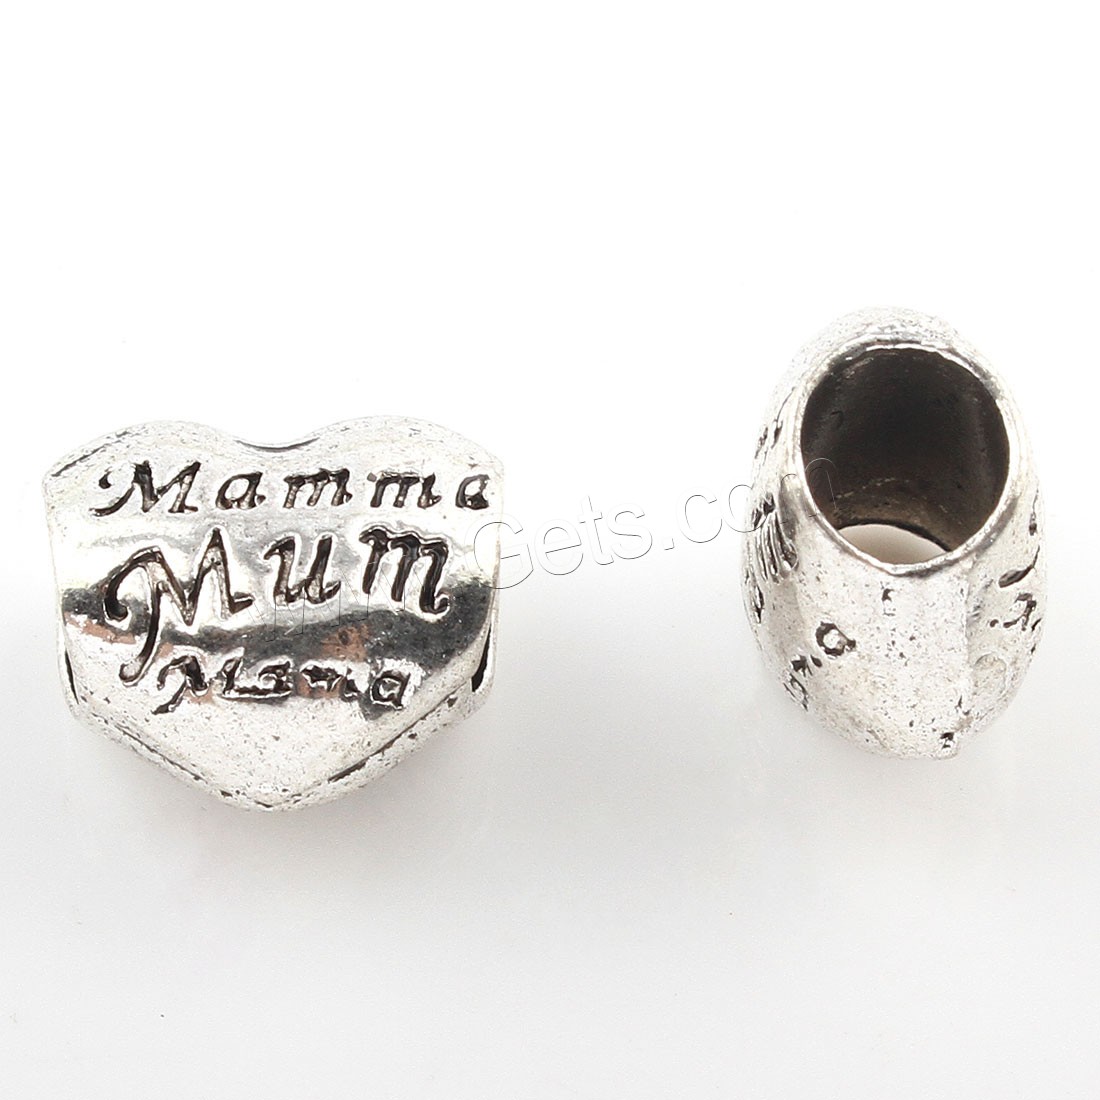 Zinc Alloy Jewelry Beads, antique silver color plated, 11x10mm, Hole:Approx 5mm, Approx 293PCs/Bag, Sold By Bag